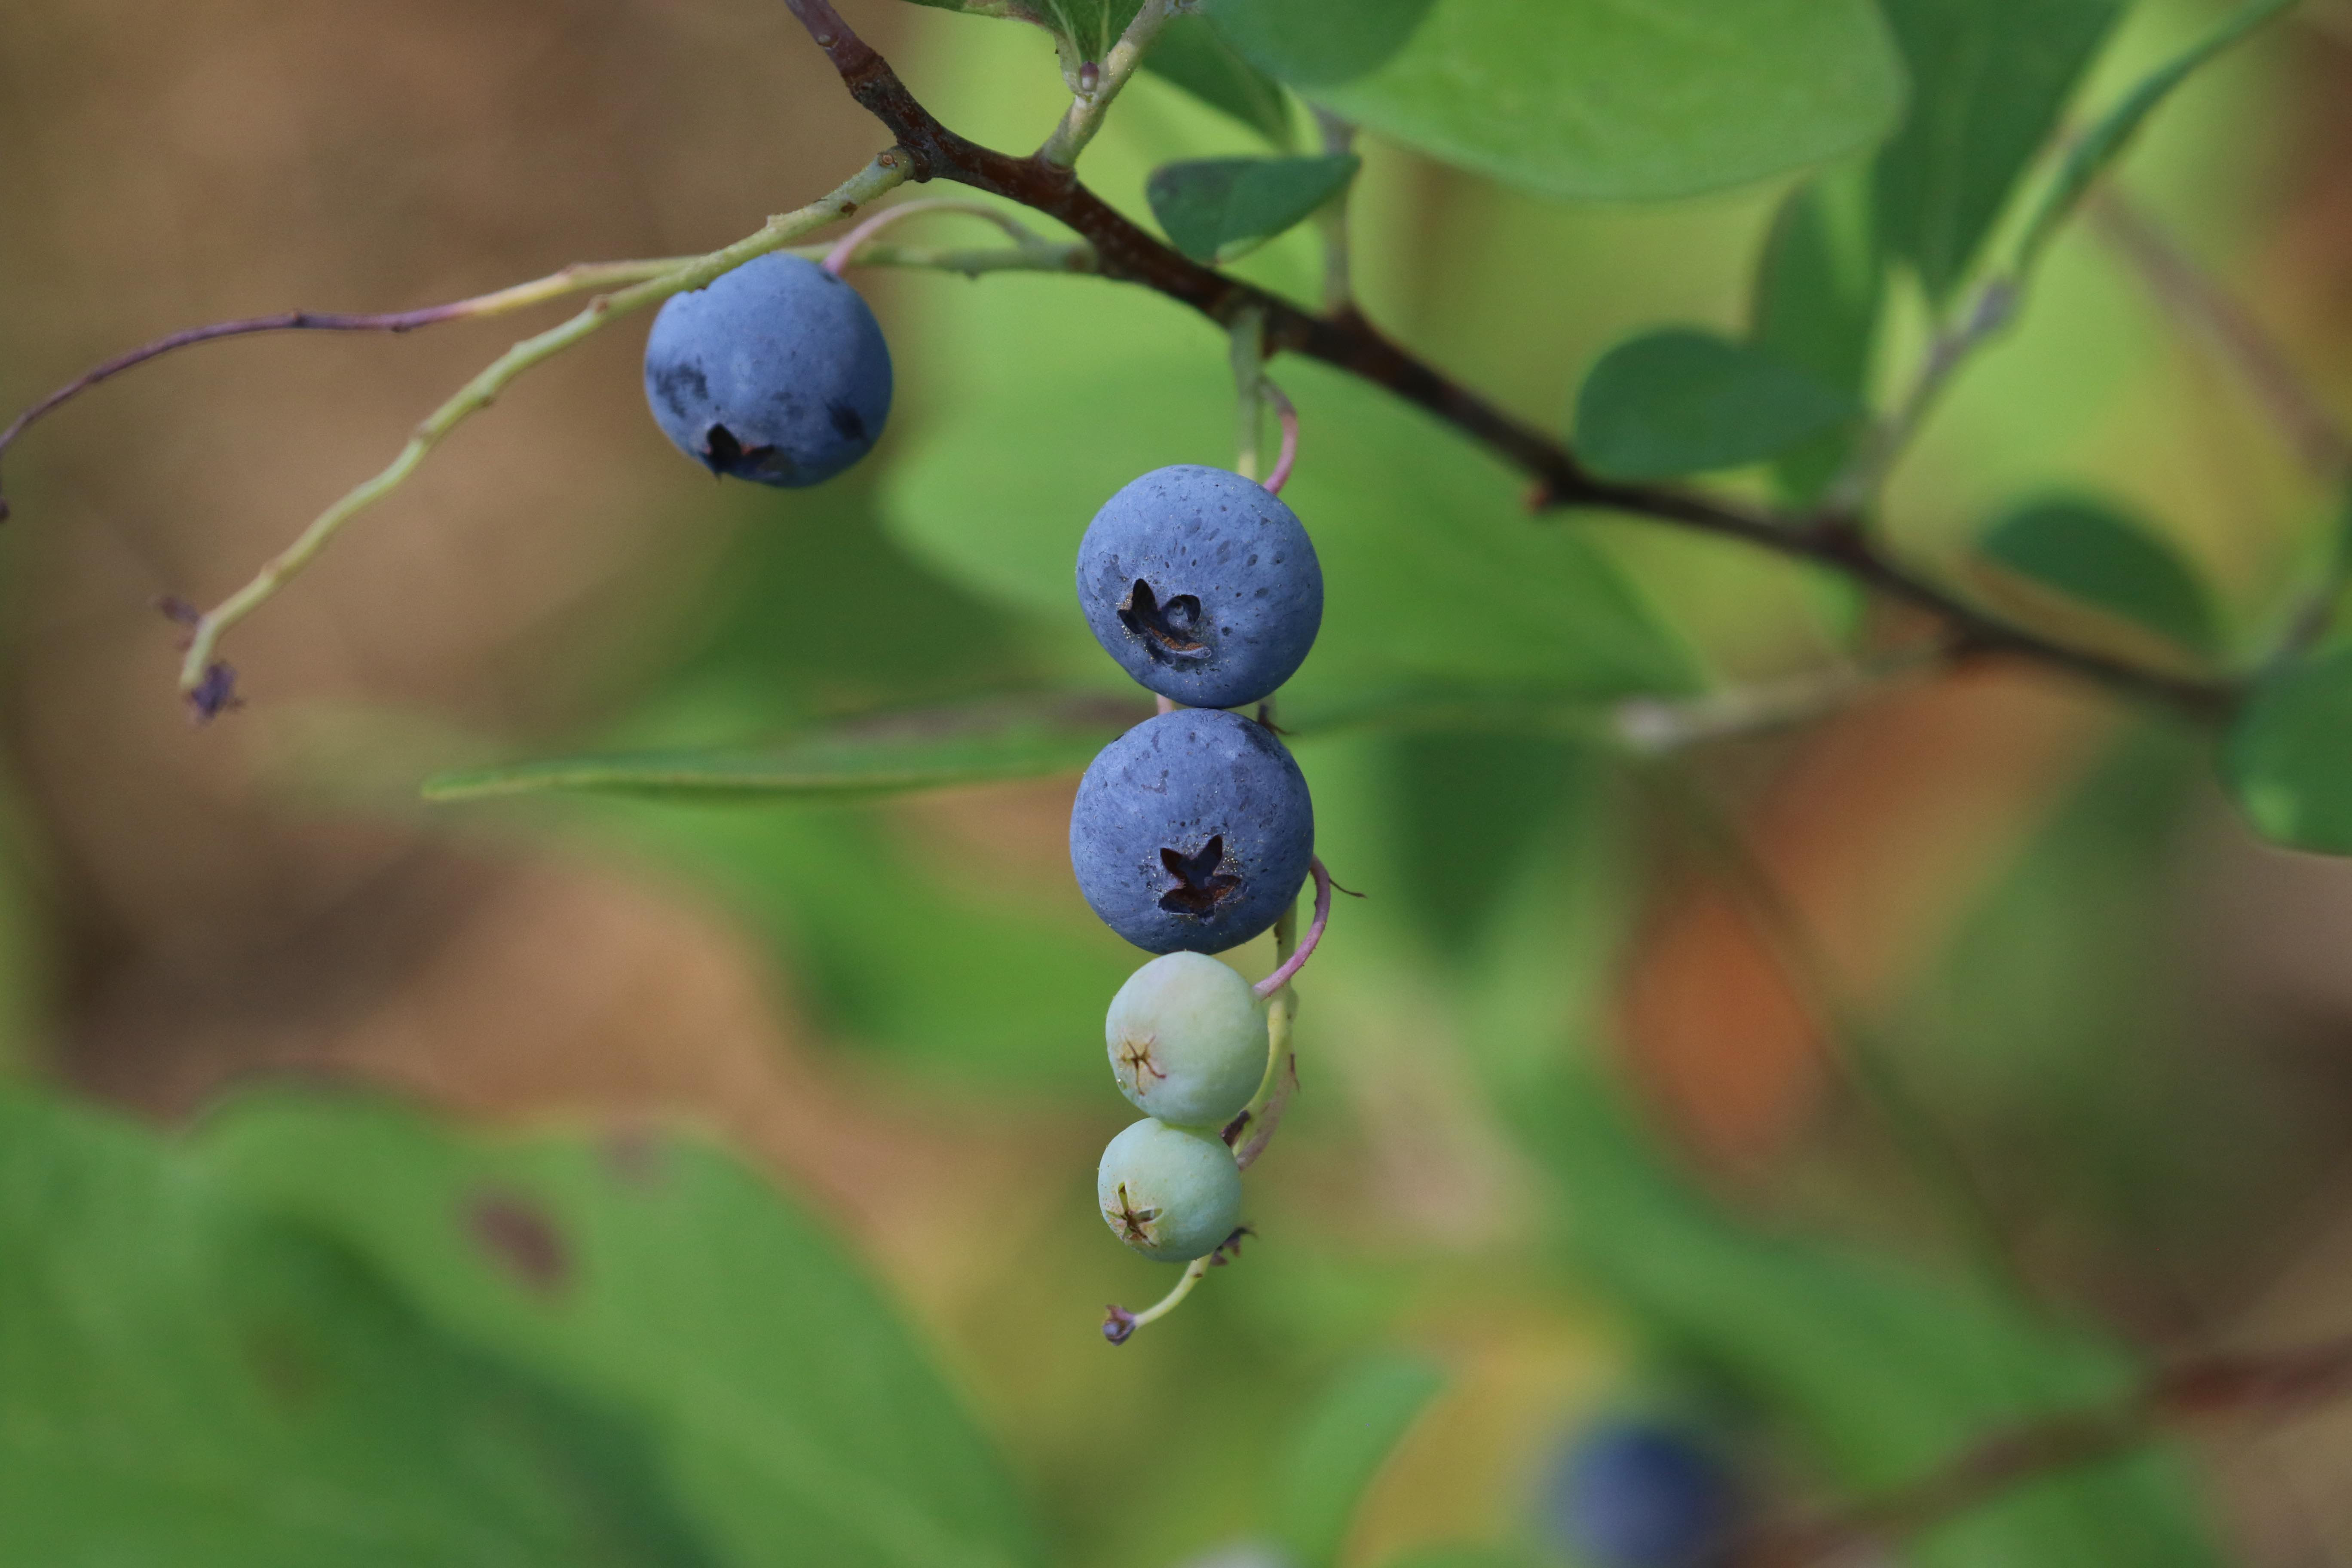 The Scientific Name is Gaylussacia frondosa. You will likely hear them called Blue Huckleberry, Dangleberry. This picture shows the A pair of unusually plump huckleberries.  of Gaylussacia frondosa